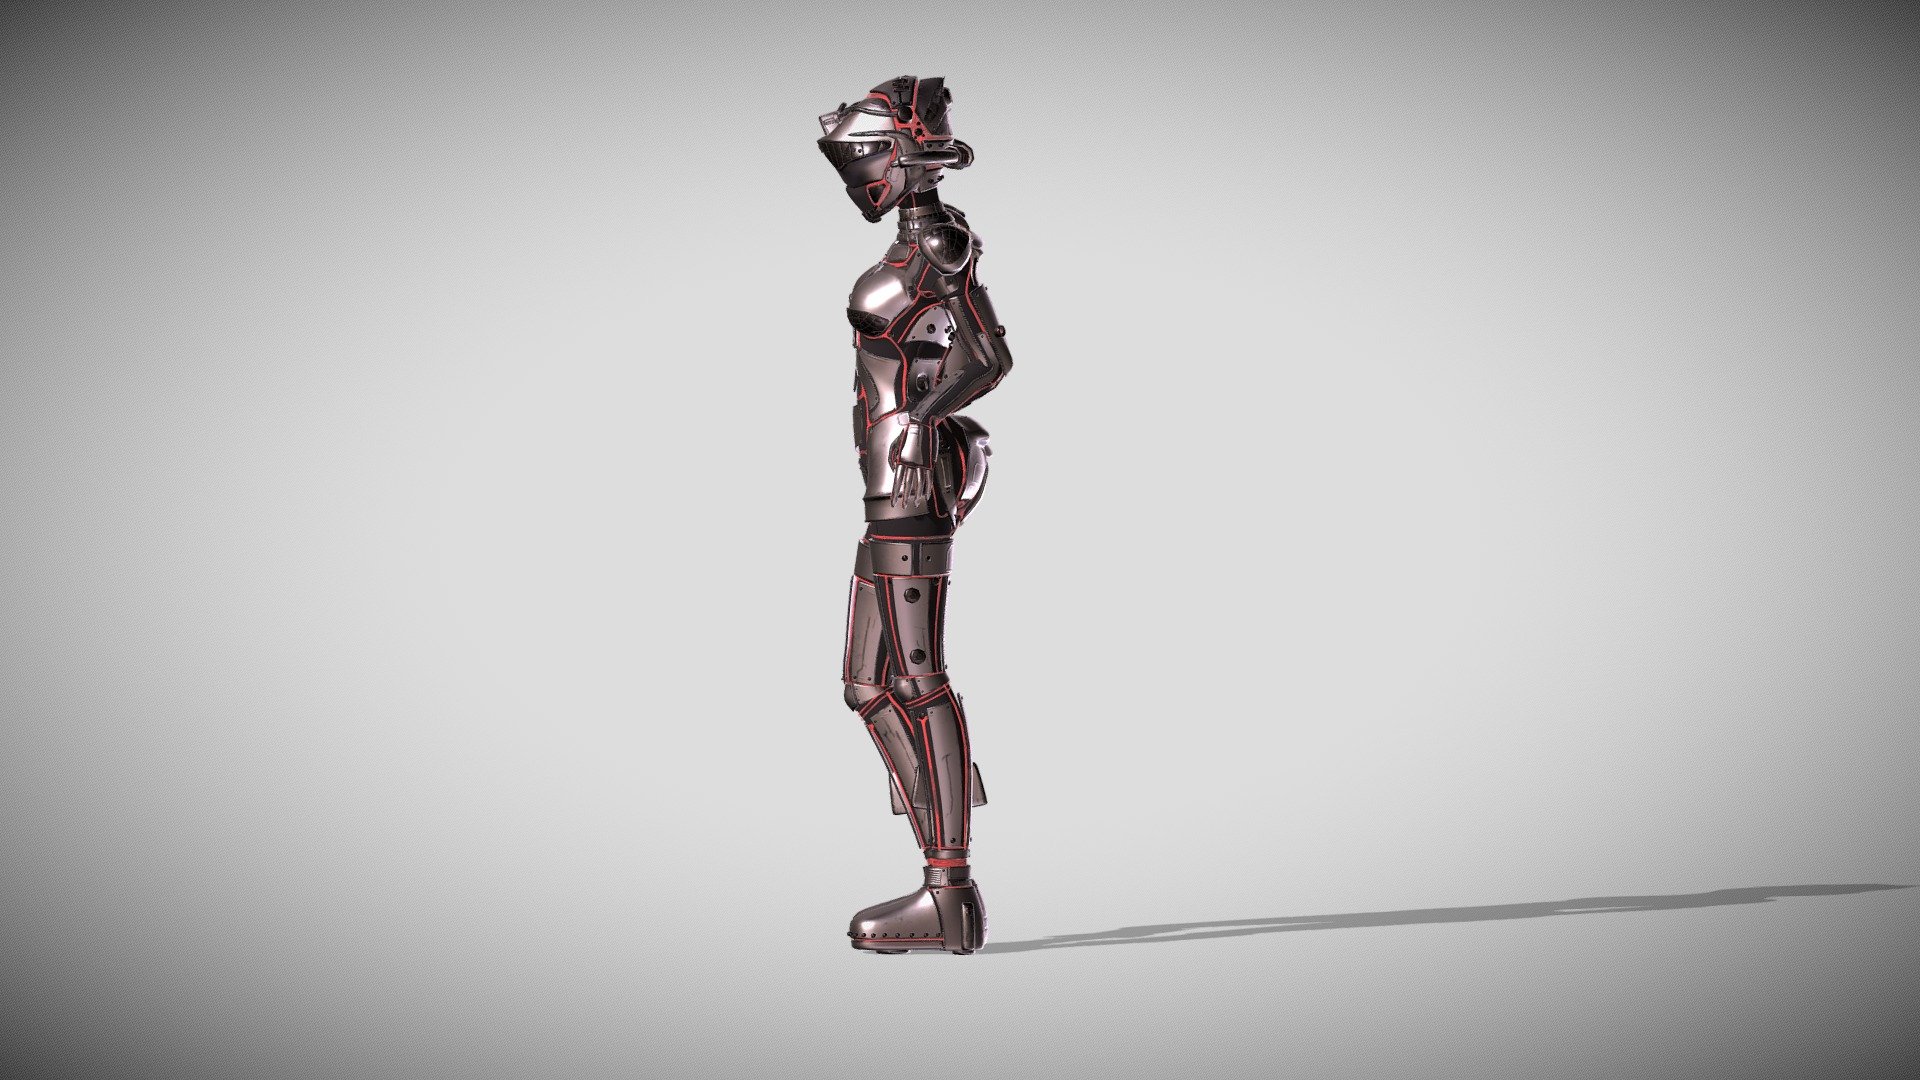 High Detail Tech-Suit
Rigged - In a standing Pose.
UV Unwrapped and textured. 
Comes with textures at 4096x4096 resolution. 

The model contains 49 objects, 4 sets of material, and 4 sets of textures. 
Modeled in Blender, painted in Substance Painter. 

Blend file before modifiers has 8.538 Faces, and 11.484 Vertices.

Video Preview: https://youtu.be/NAj9oe-wgck - Tech-Suit - Buy Royalty Free 3D model by Ed.Jan 3d model